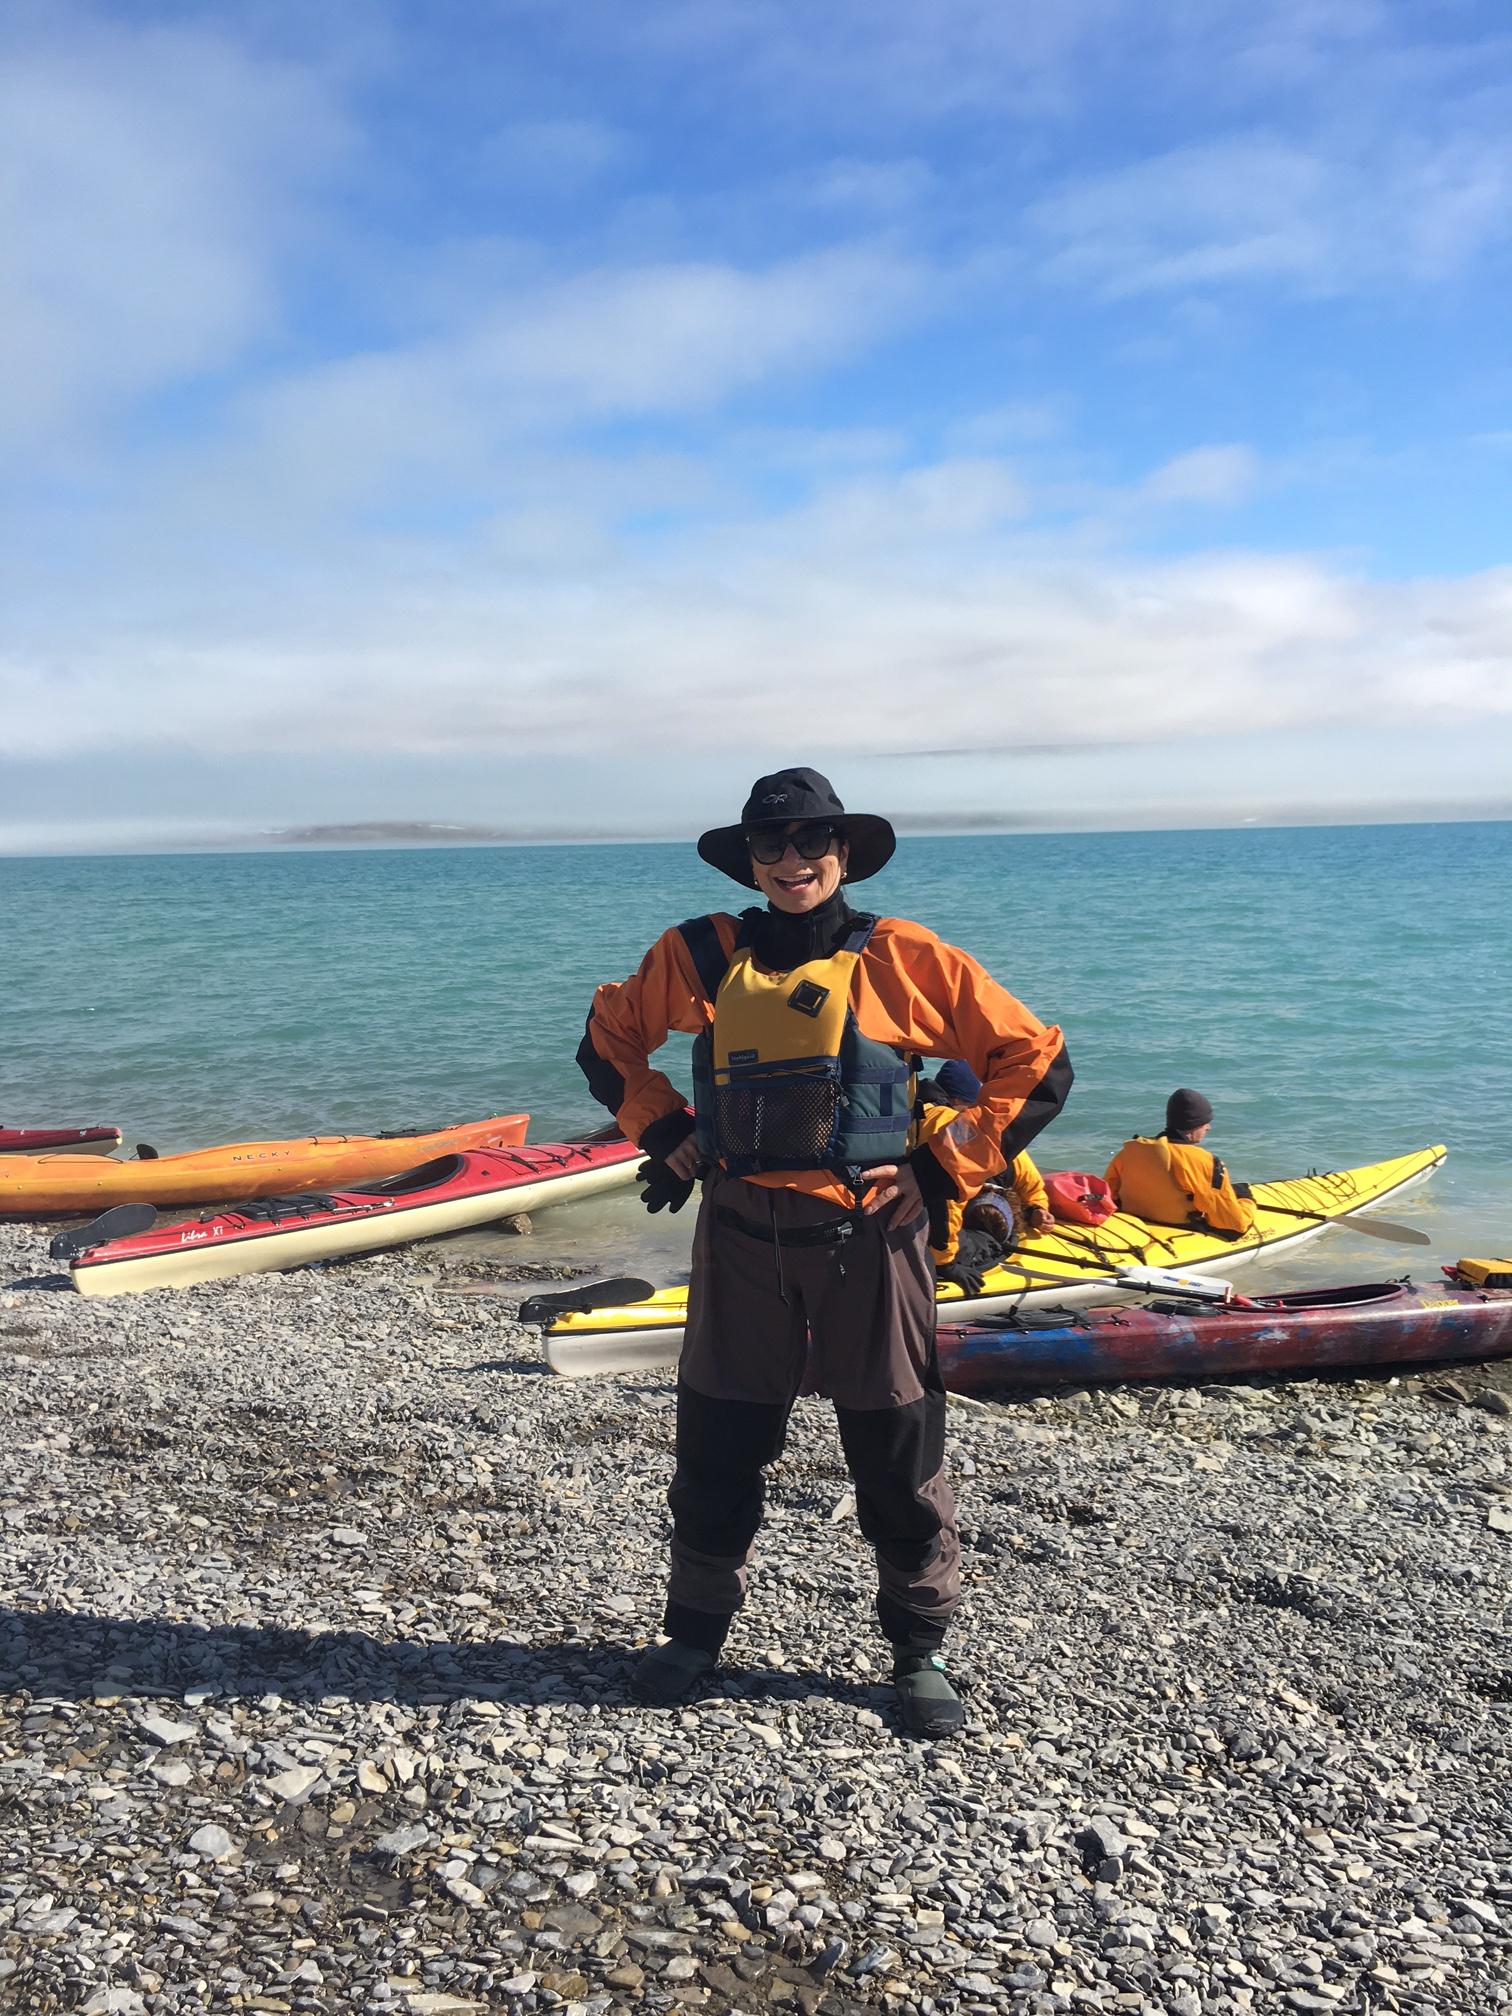 Jeanne Beker gears up to go sea kayaking at Arctic Watch Wilderness Lodge